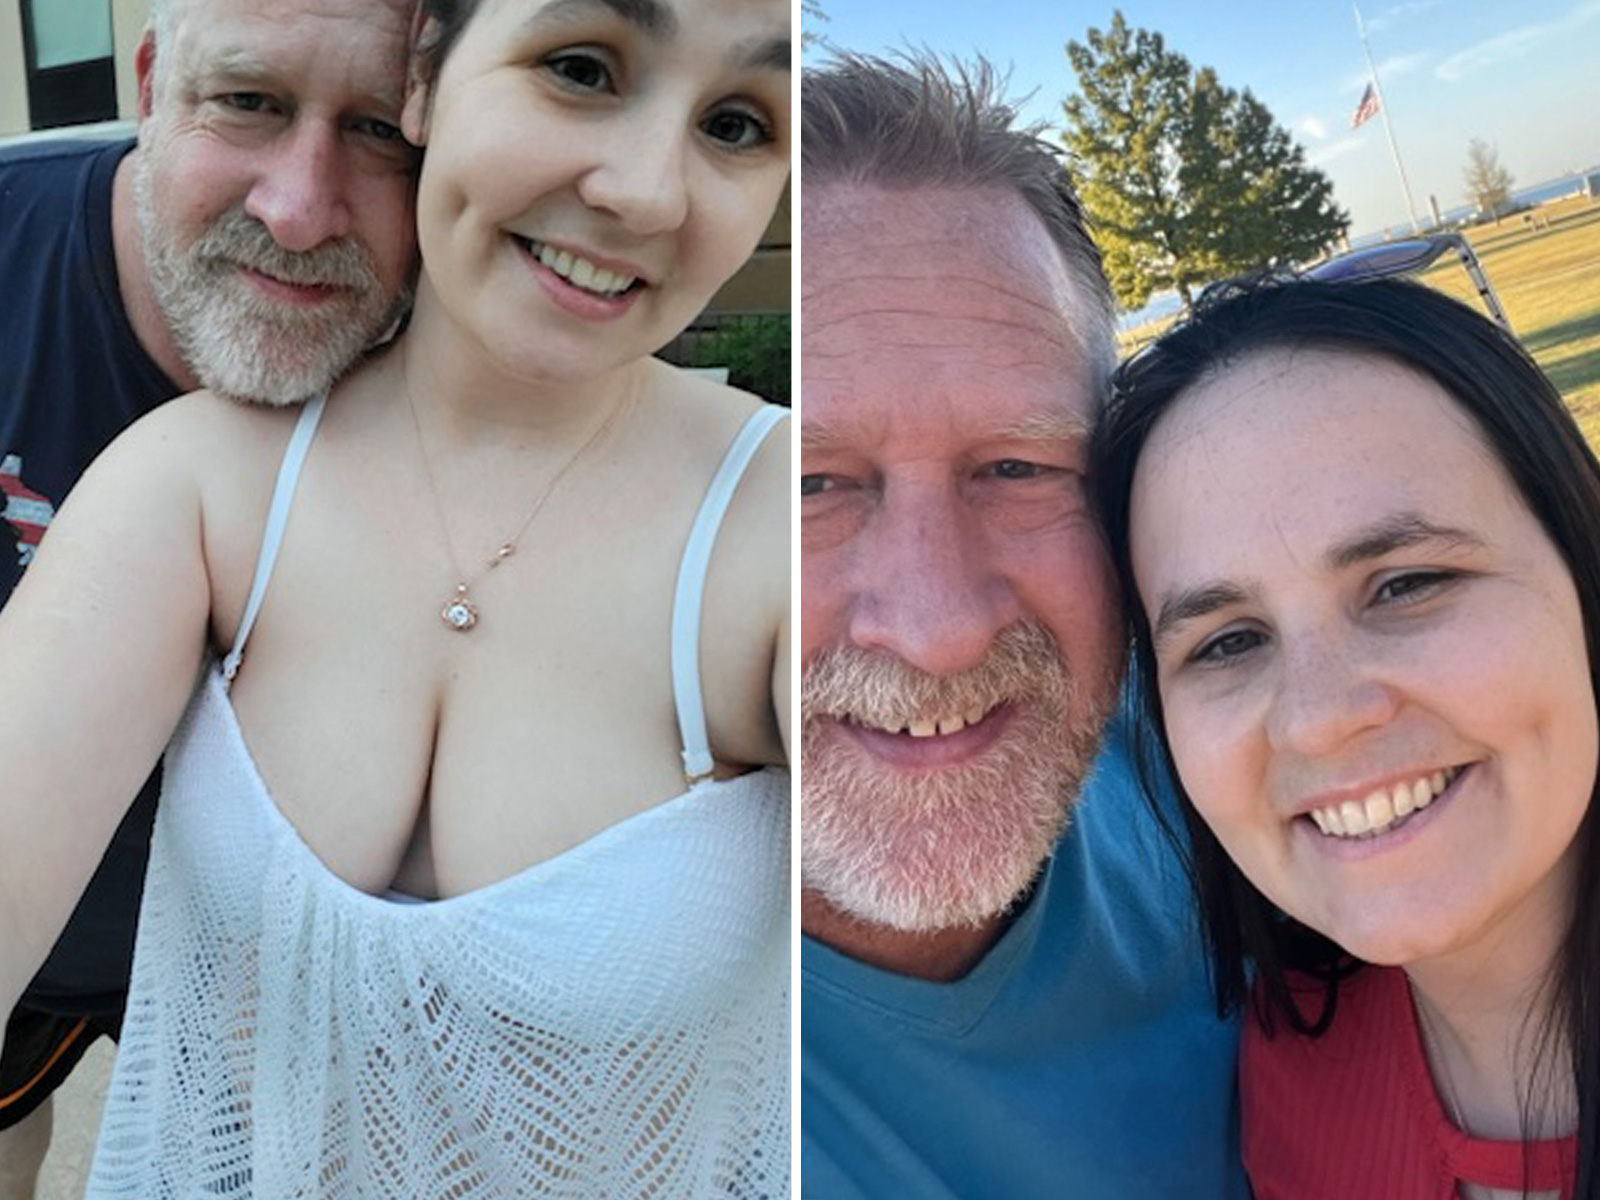 He's My Fiancé, Not My Dad': Woman Defends 21-Year Age Gap